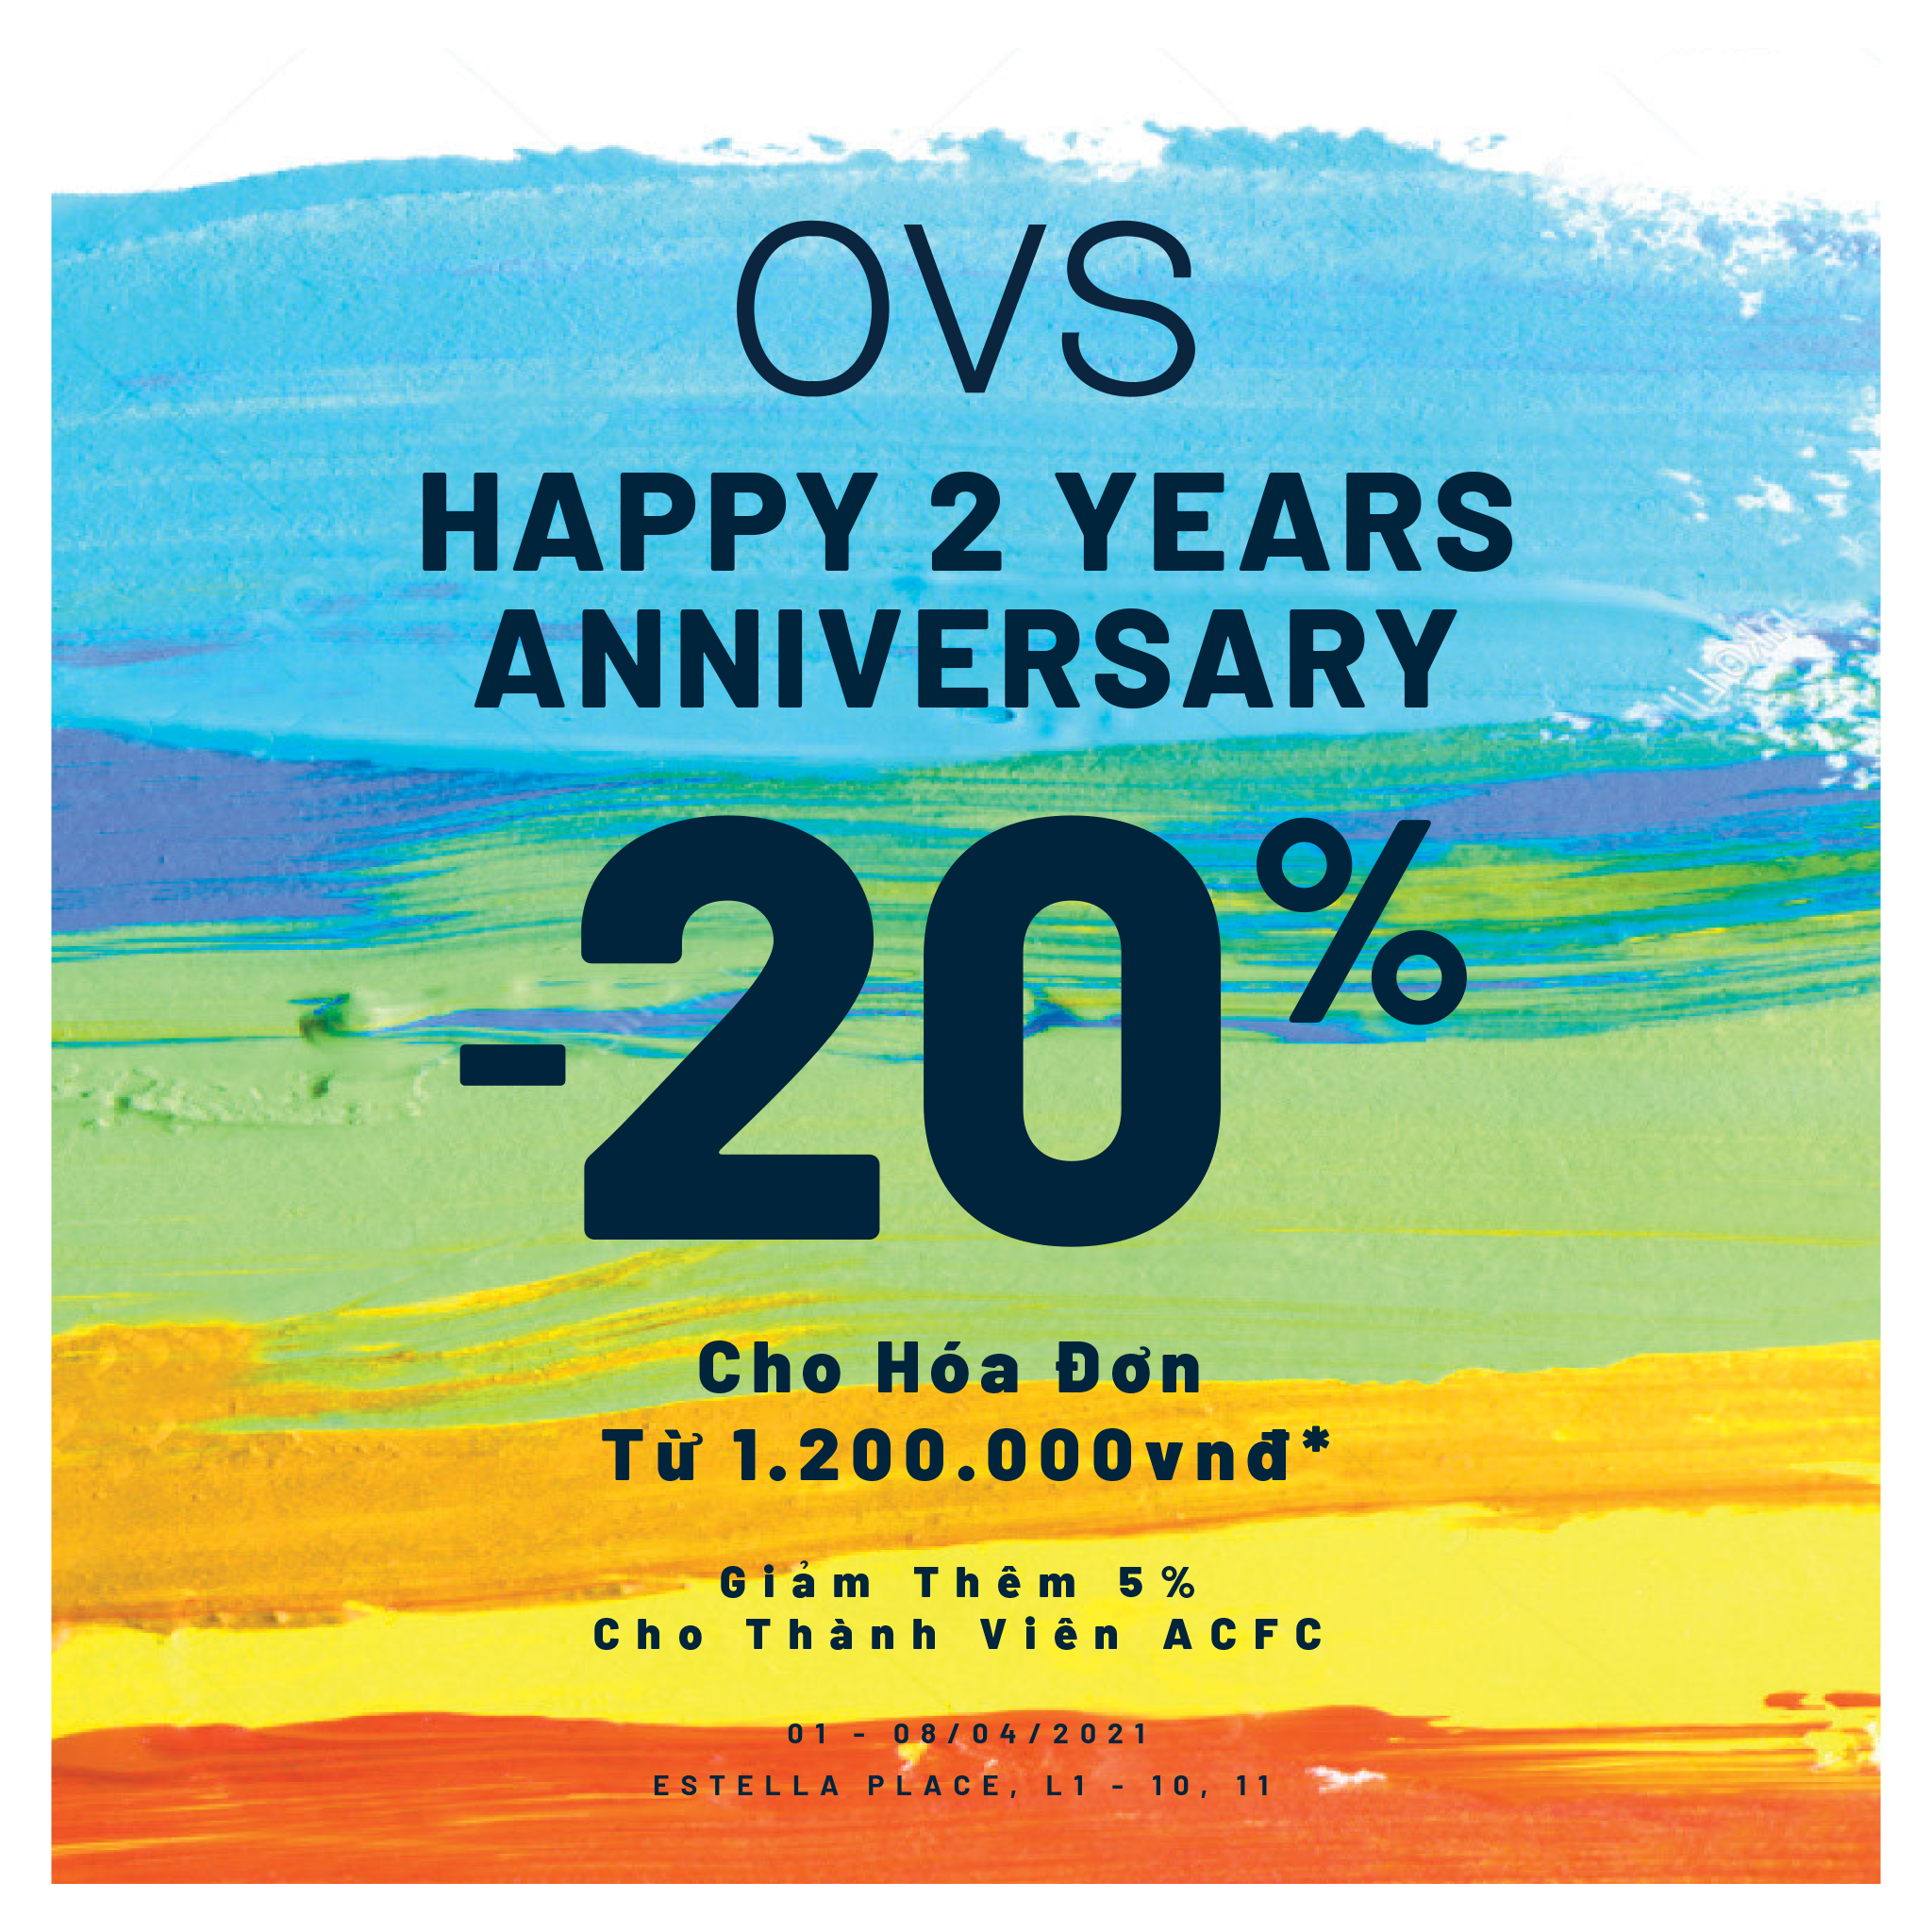 🎉HAPPY 2-YEAR ANNIVERSARY - 20% OFF BOOKING FROM 1,200,000 VND